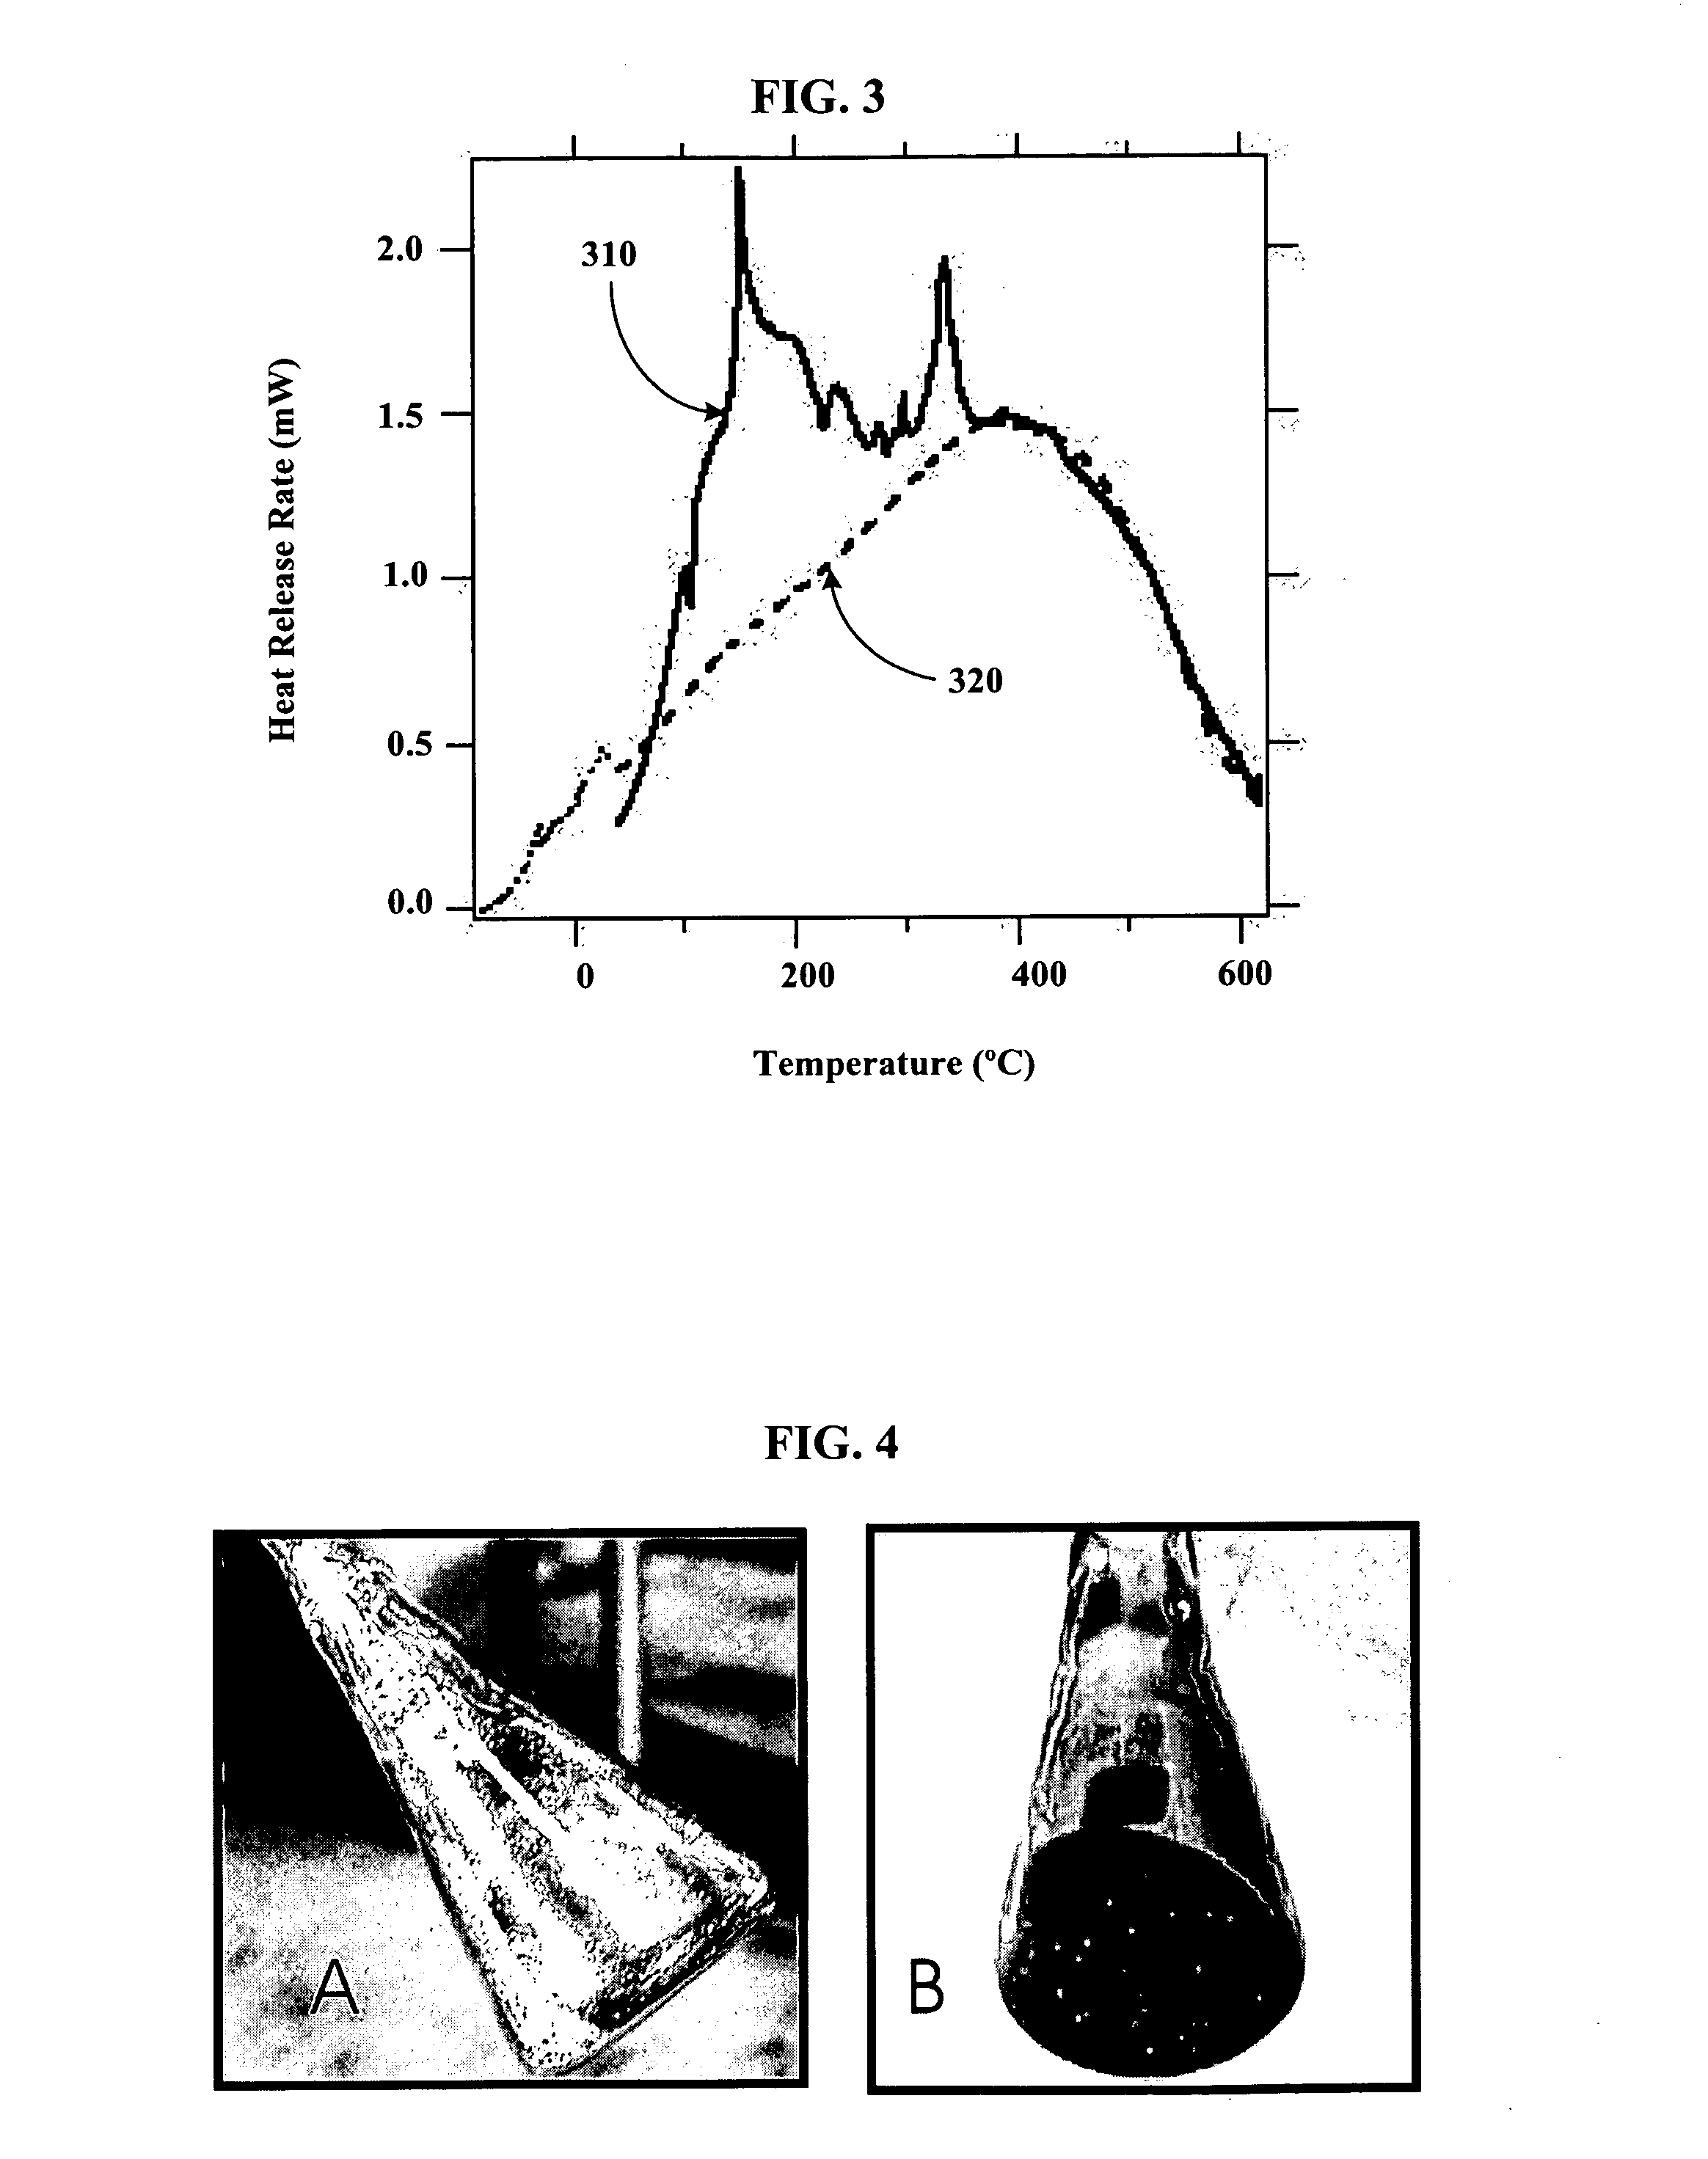 Silica gel compositions containing alkali metals and alkali metal alloy